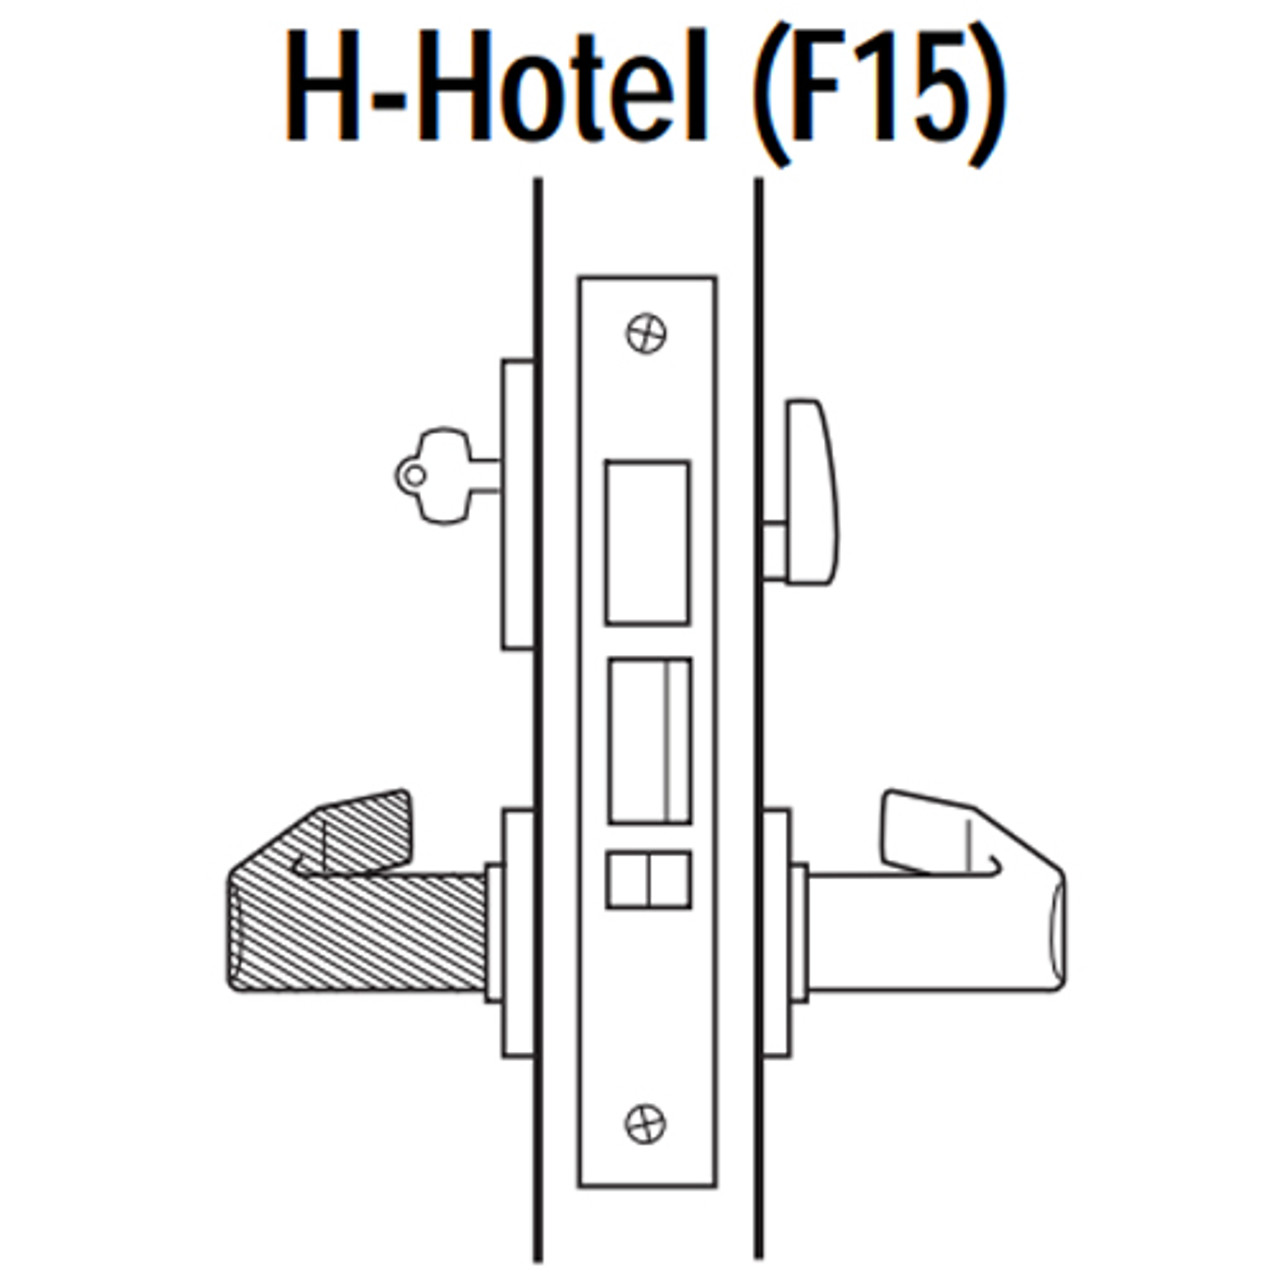 45H7H17RH613 Best 40H Series Hotel with Deadbolt Heavy Duty Mortise Lever Lock with Gull Wing RH in Oil Rubbed Bronze